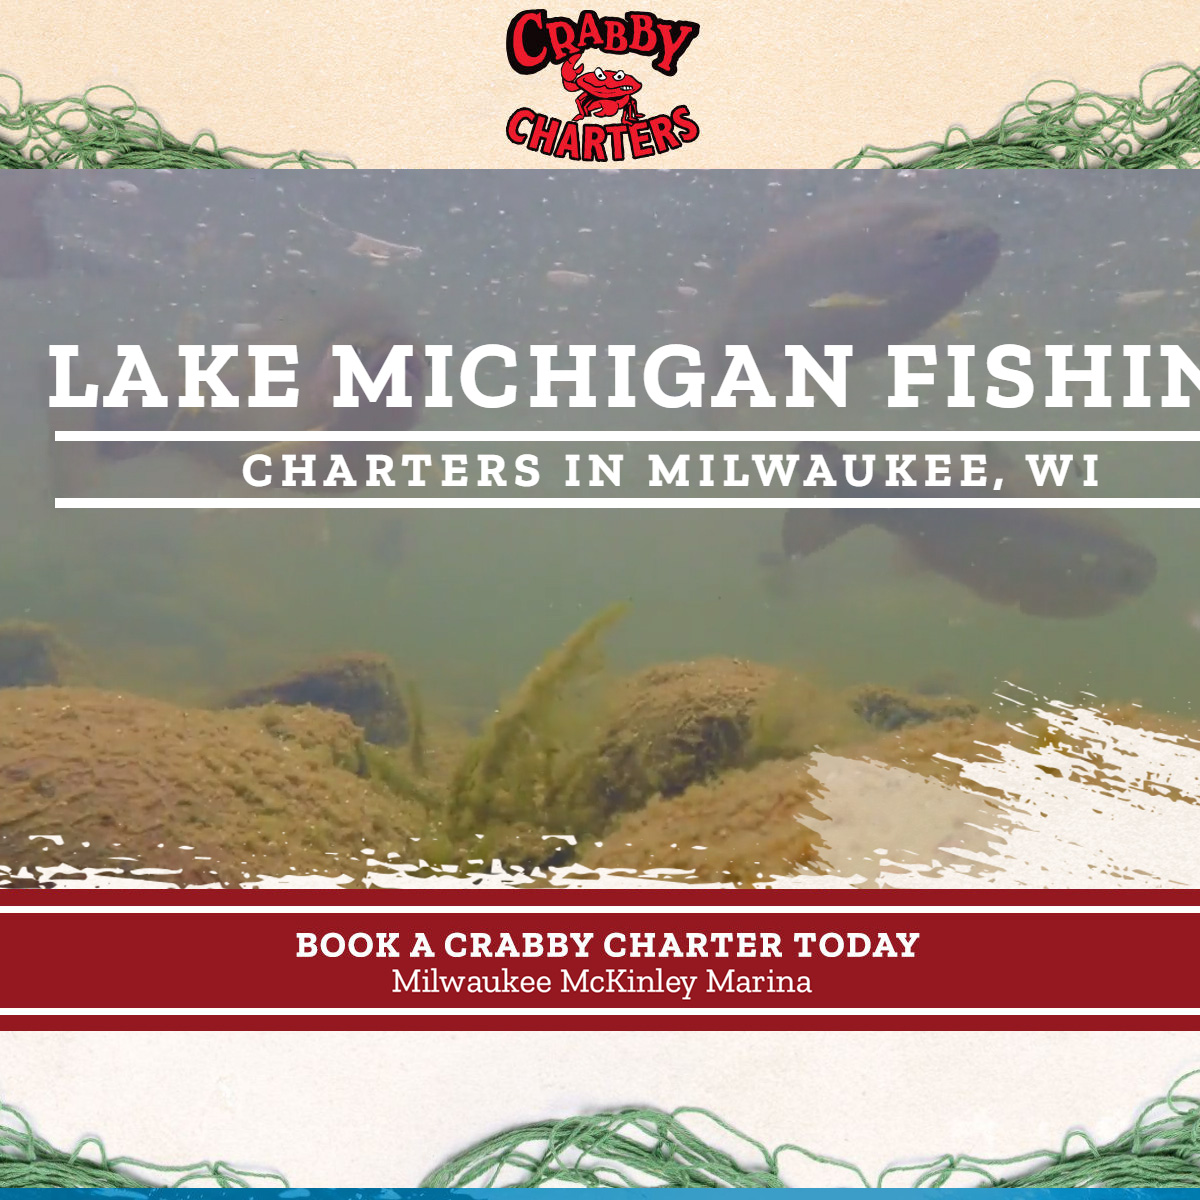 THE best Great Lakes fishing charters in Milwaukee